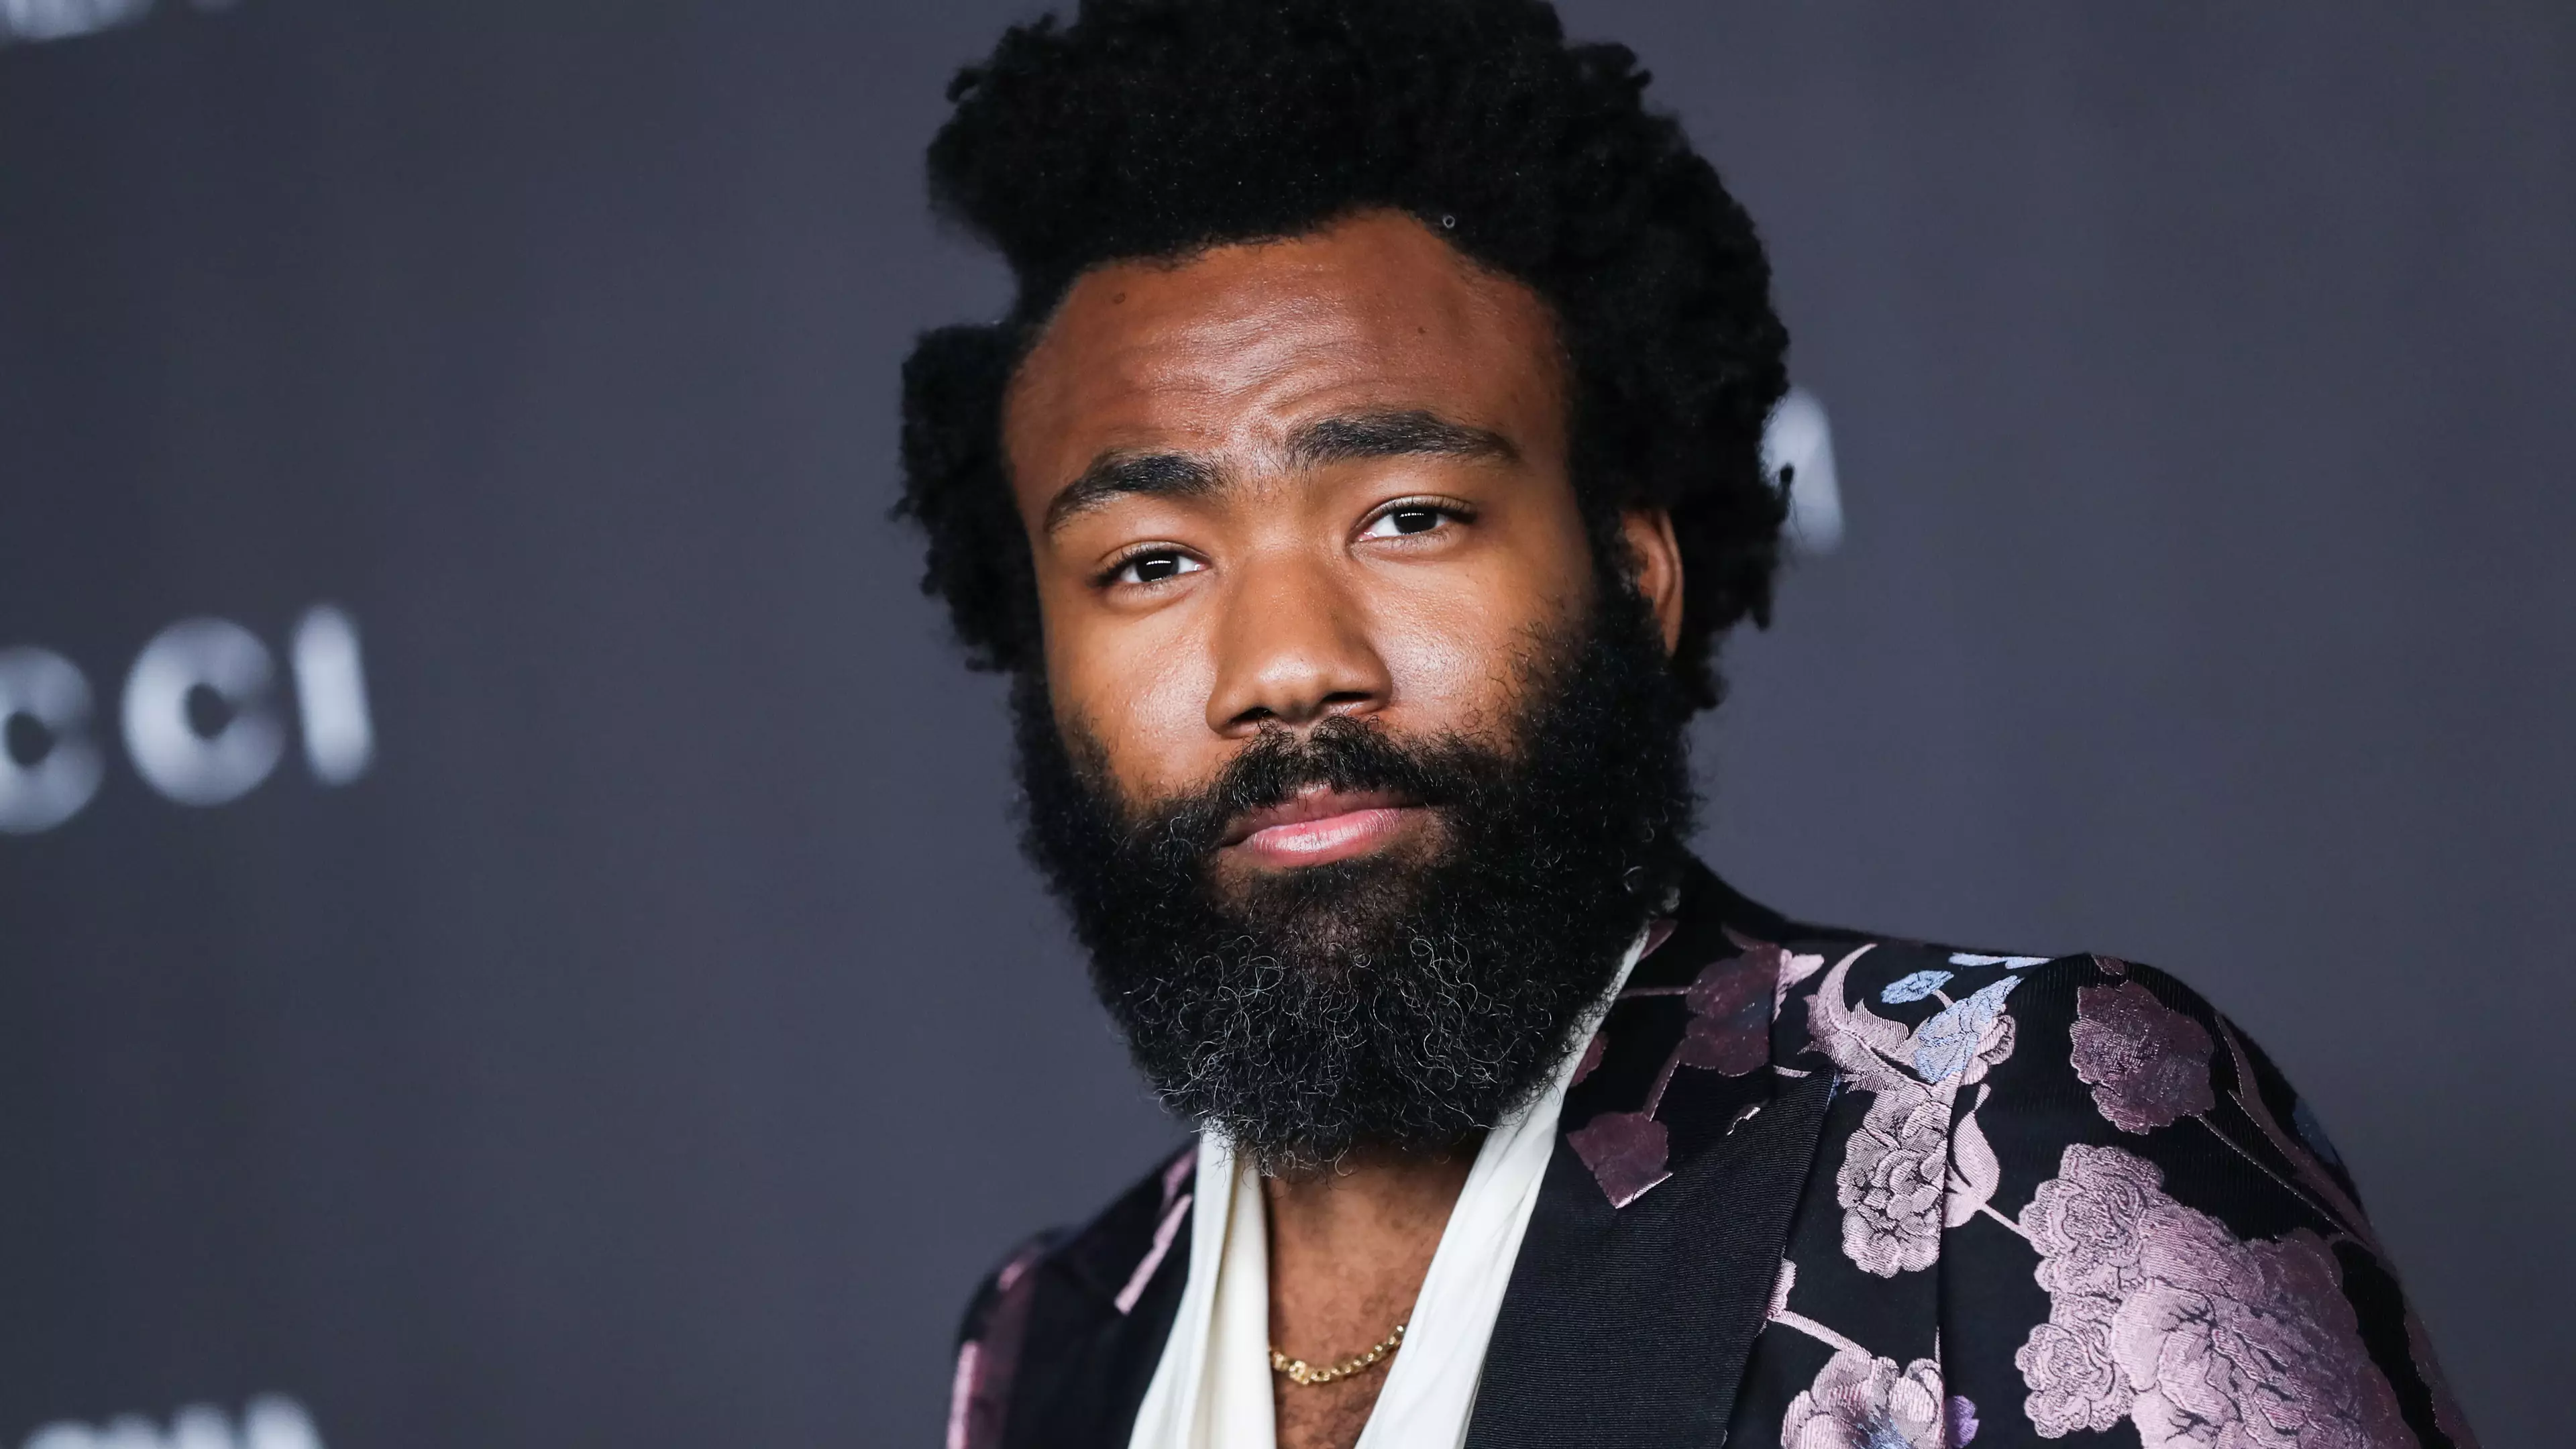 Donald Glover Takes Fans By Surprise As He Drops New Album 